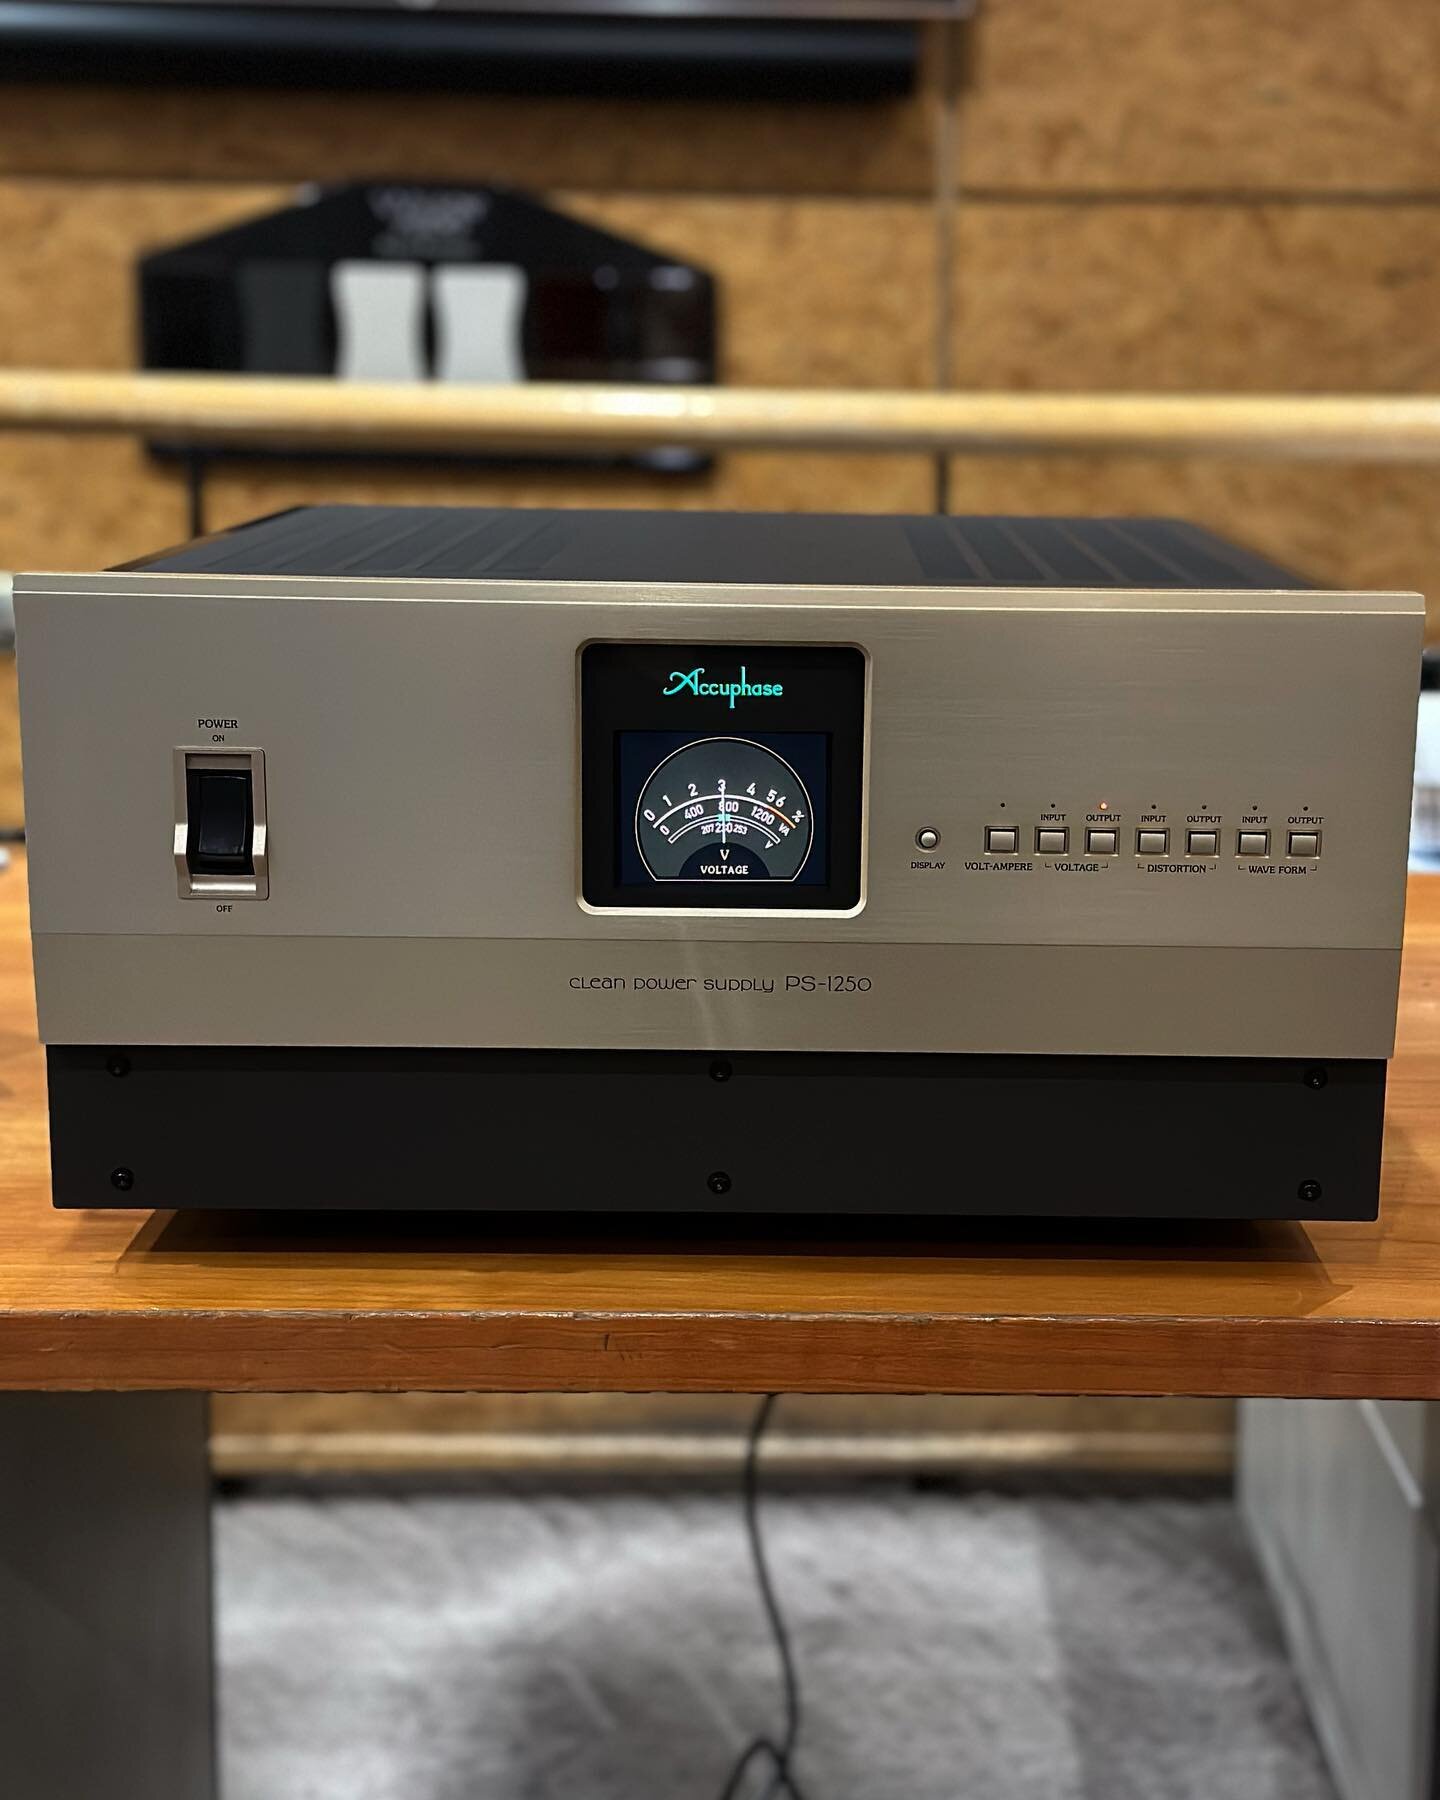 Nouveau reconditionneur secteur @accuphase PS1250.  #musichallauditorium #accuphaseps1250 #instaaudio #hifiparis #hifi #hifiporn #accuphaselove #bestaudio #hifiaudio